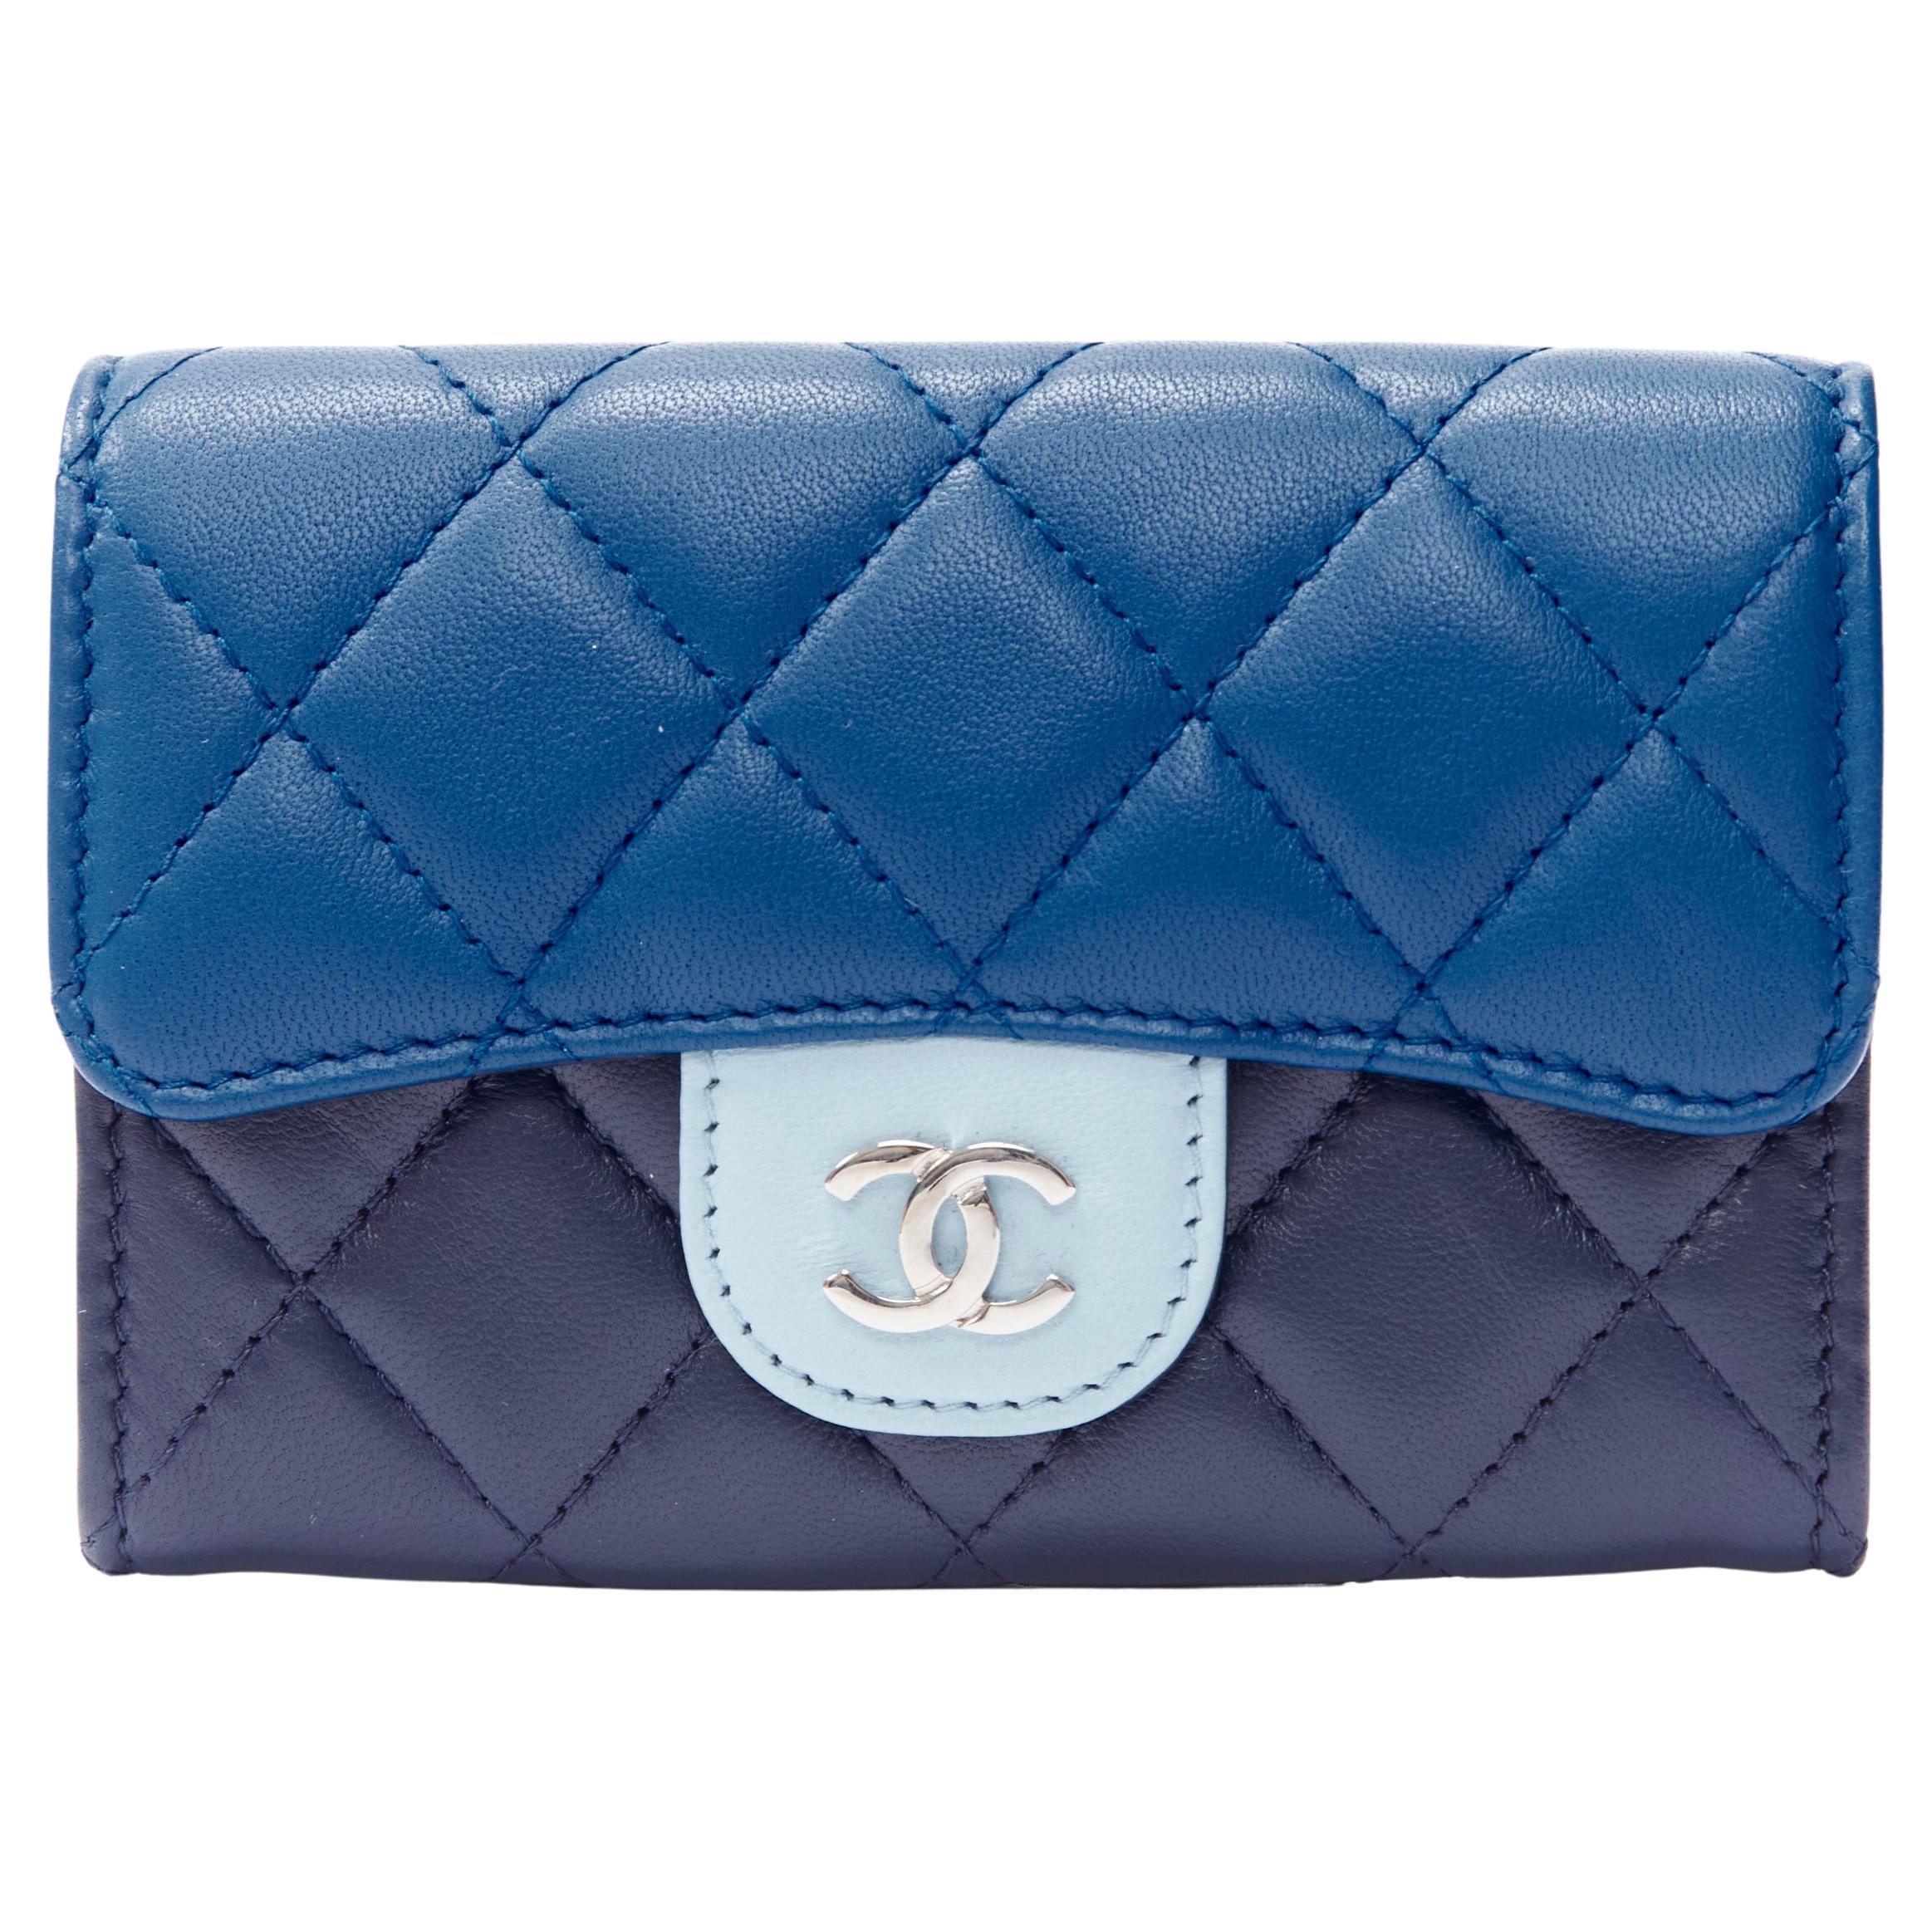 CHANEL blue tricolor lambskin diamond quilted leather CC flap PHW cardholder